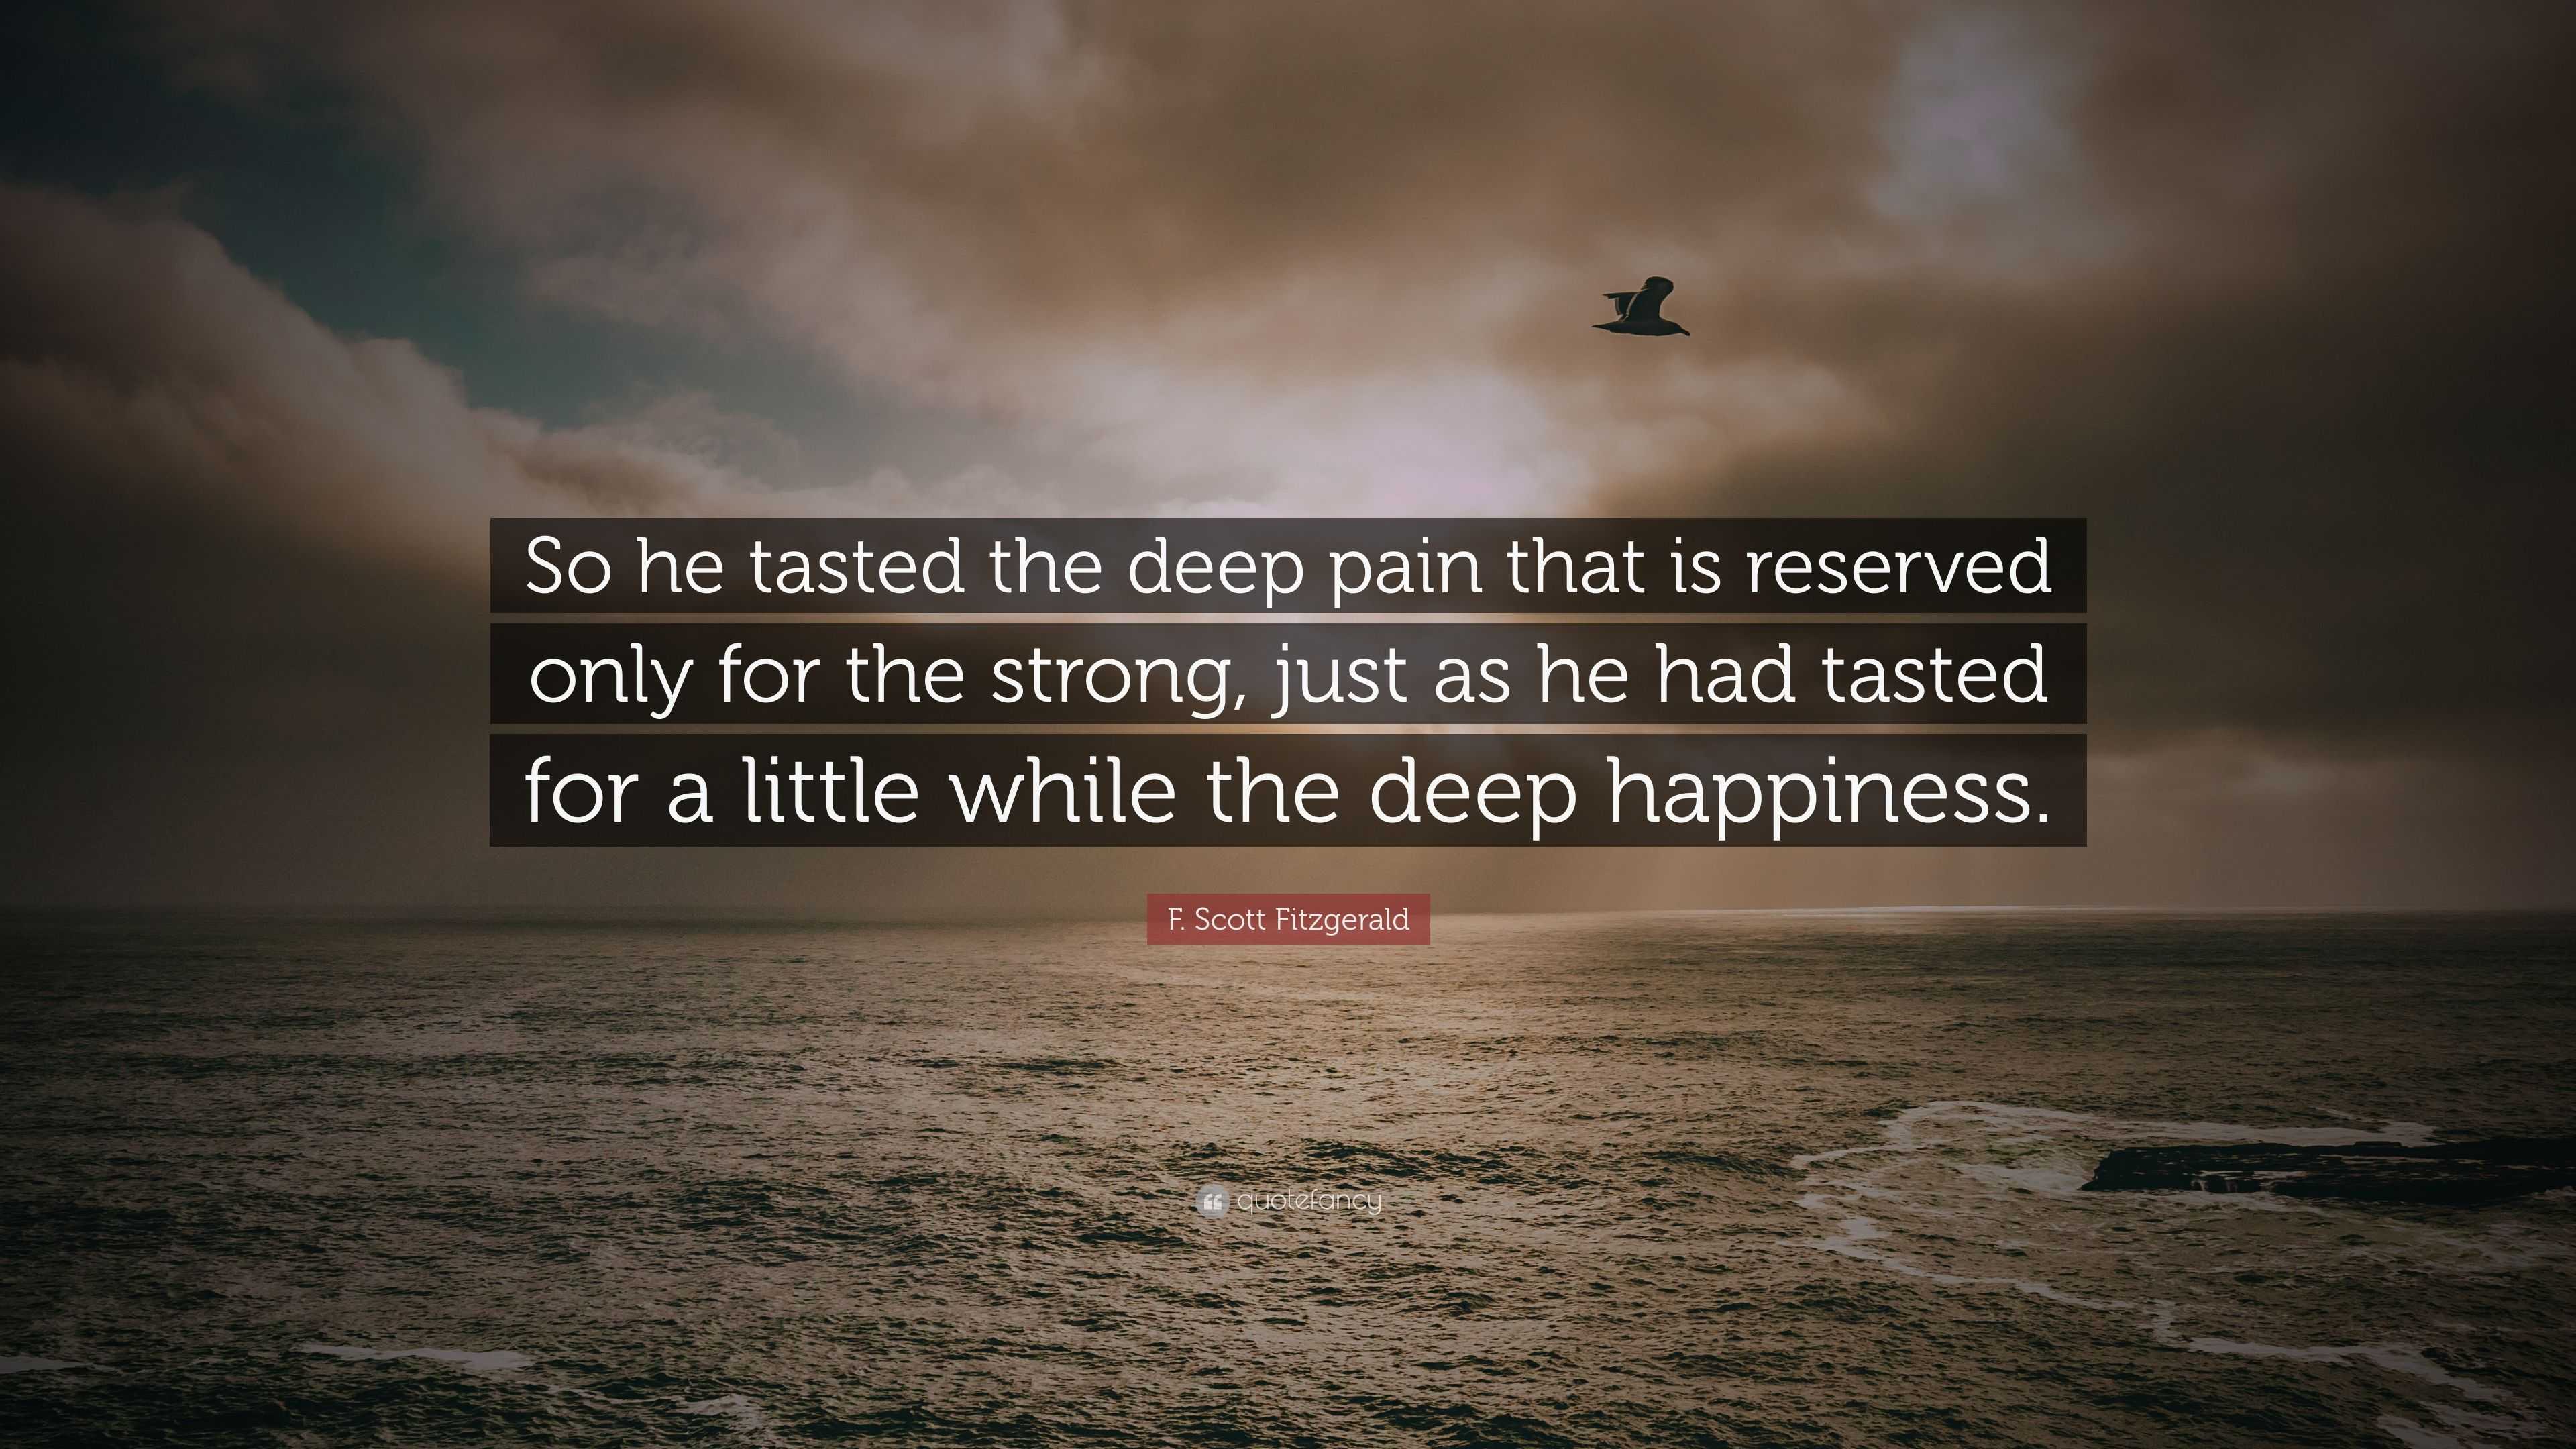 F Scott Fitzgerald Quote  So he tasted the deep  pain  